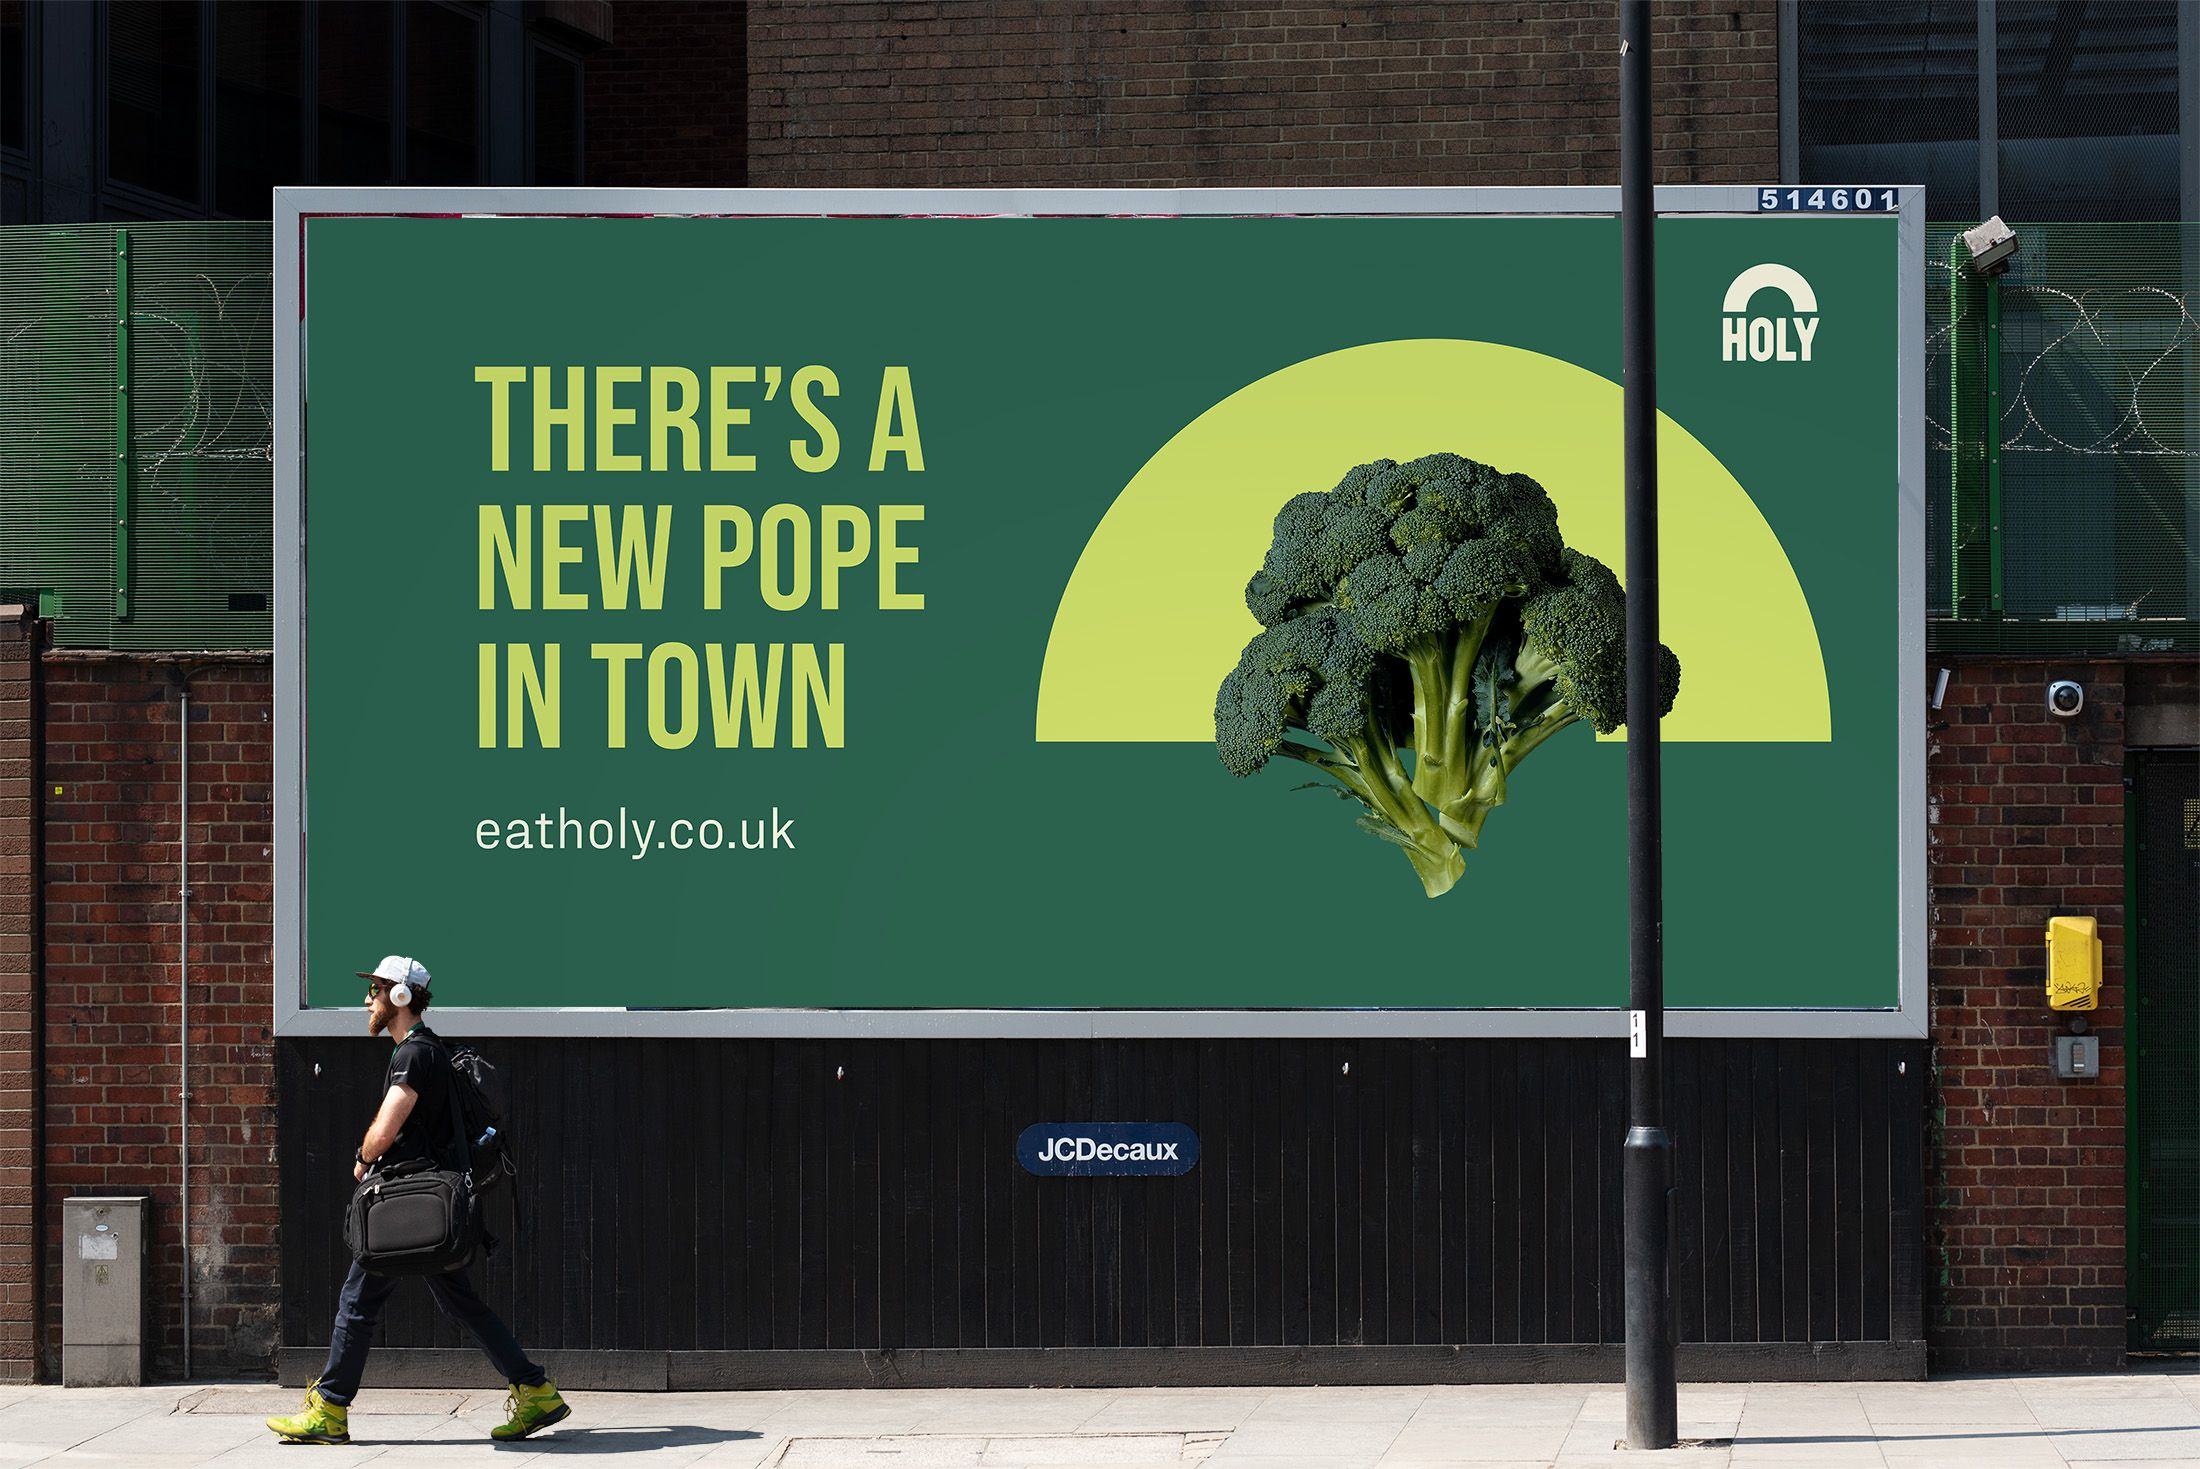 Holy vegan food delivery service street banner ad